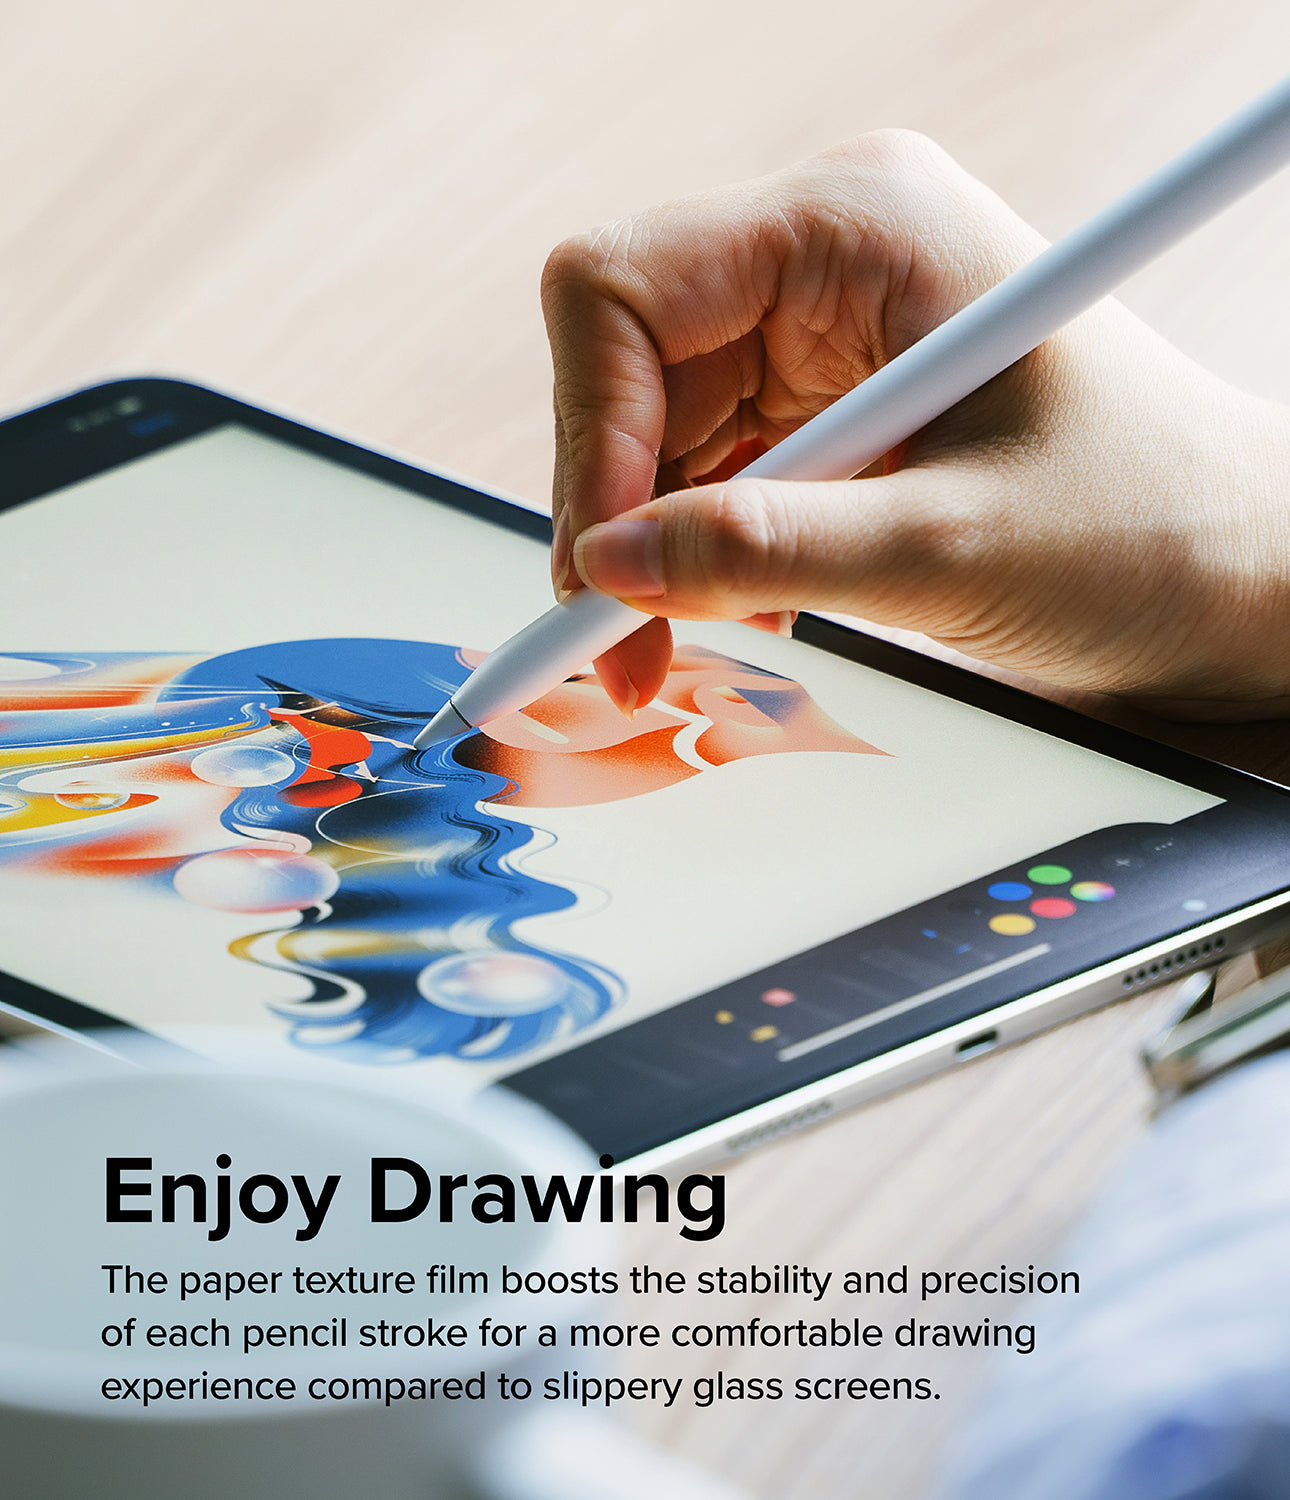 iPad Pro 11" (M4) Screen Protector | Paper Touch Film - Soft - Enjoy Drawing. The paper texture film boosts the stability and precision of each pencil stroke for a more comfortable drawing experience compared to slippery glass screens.